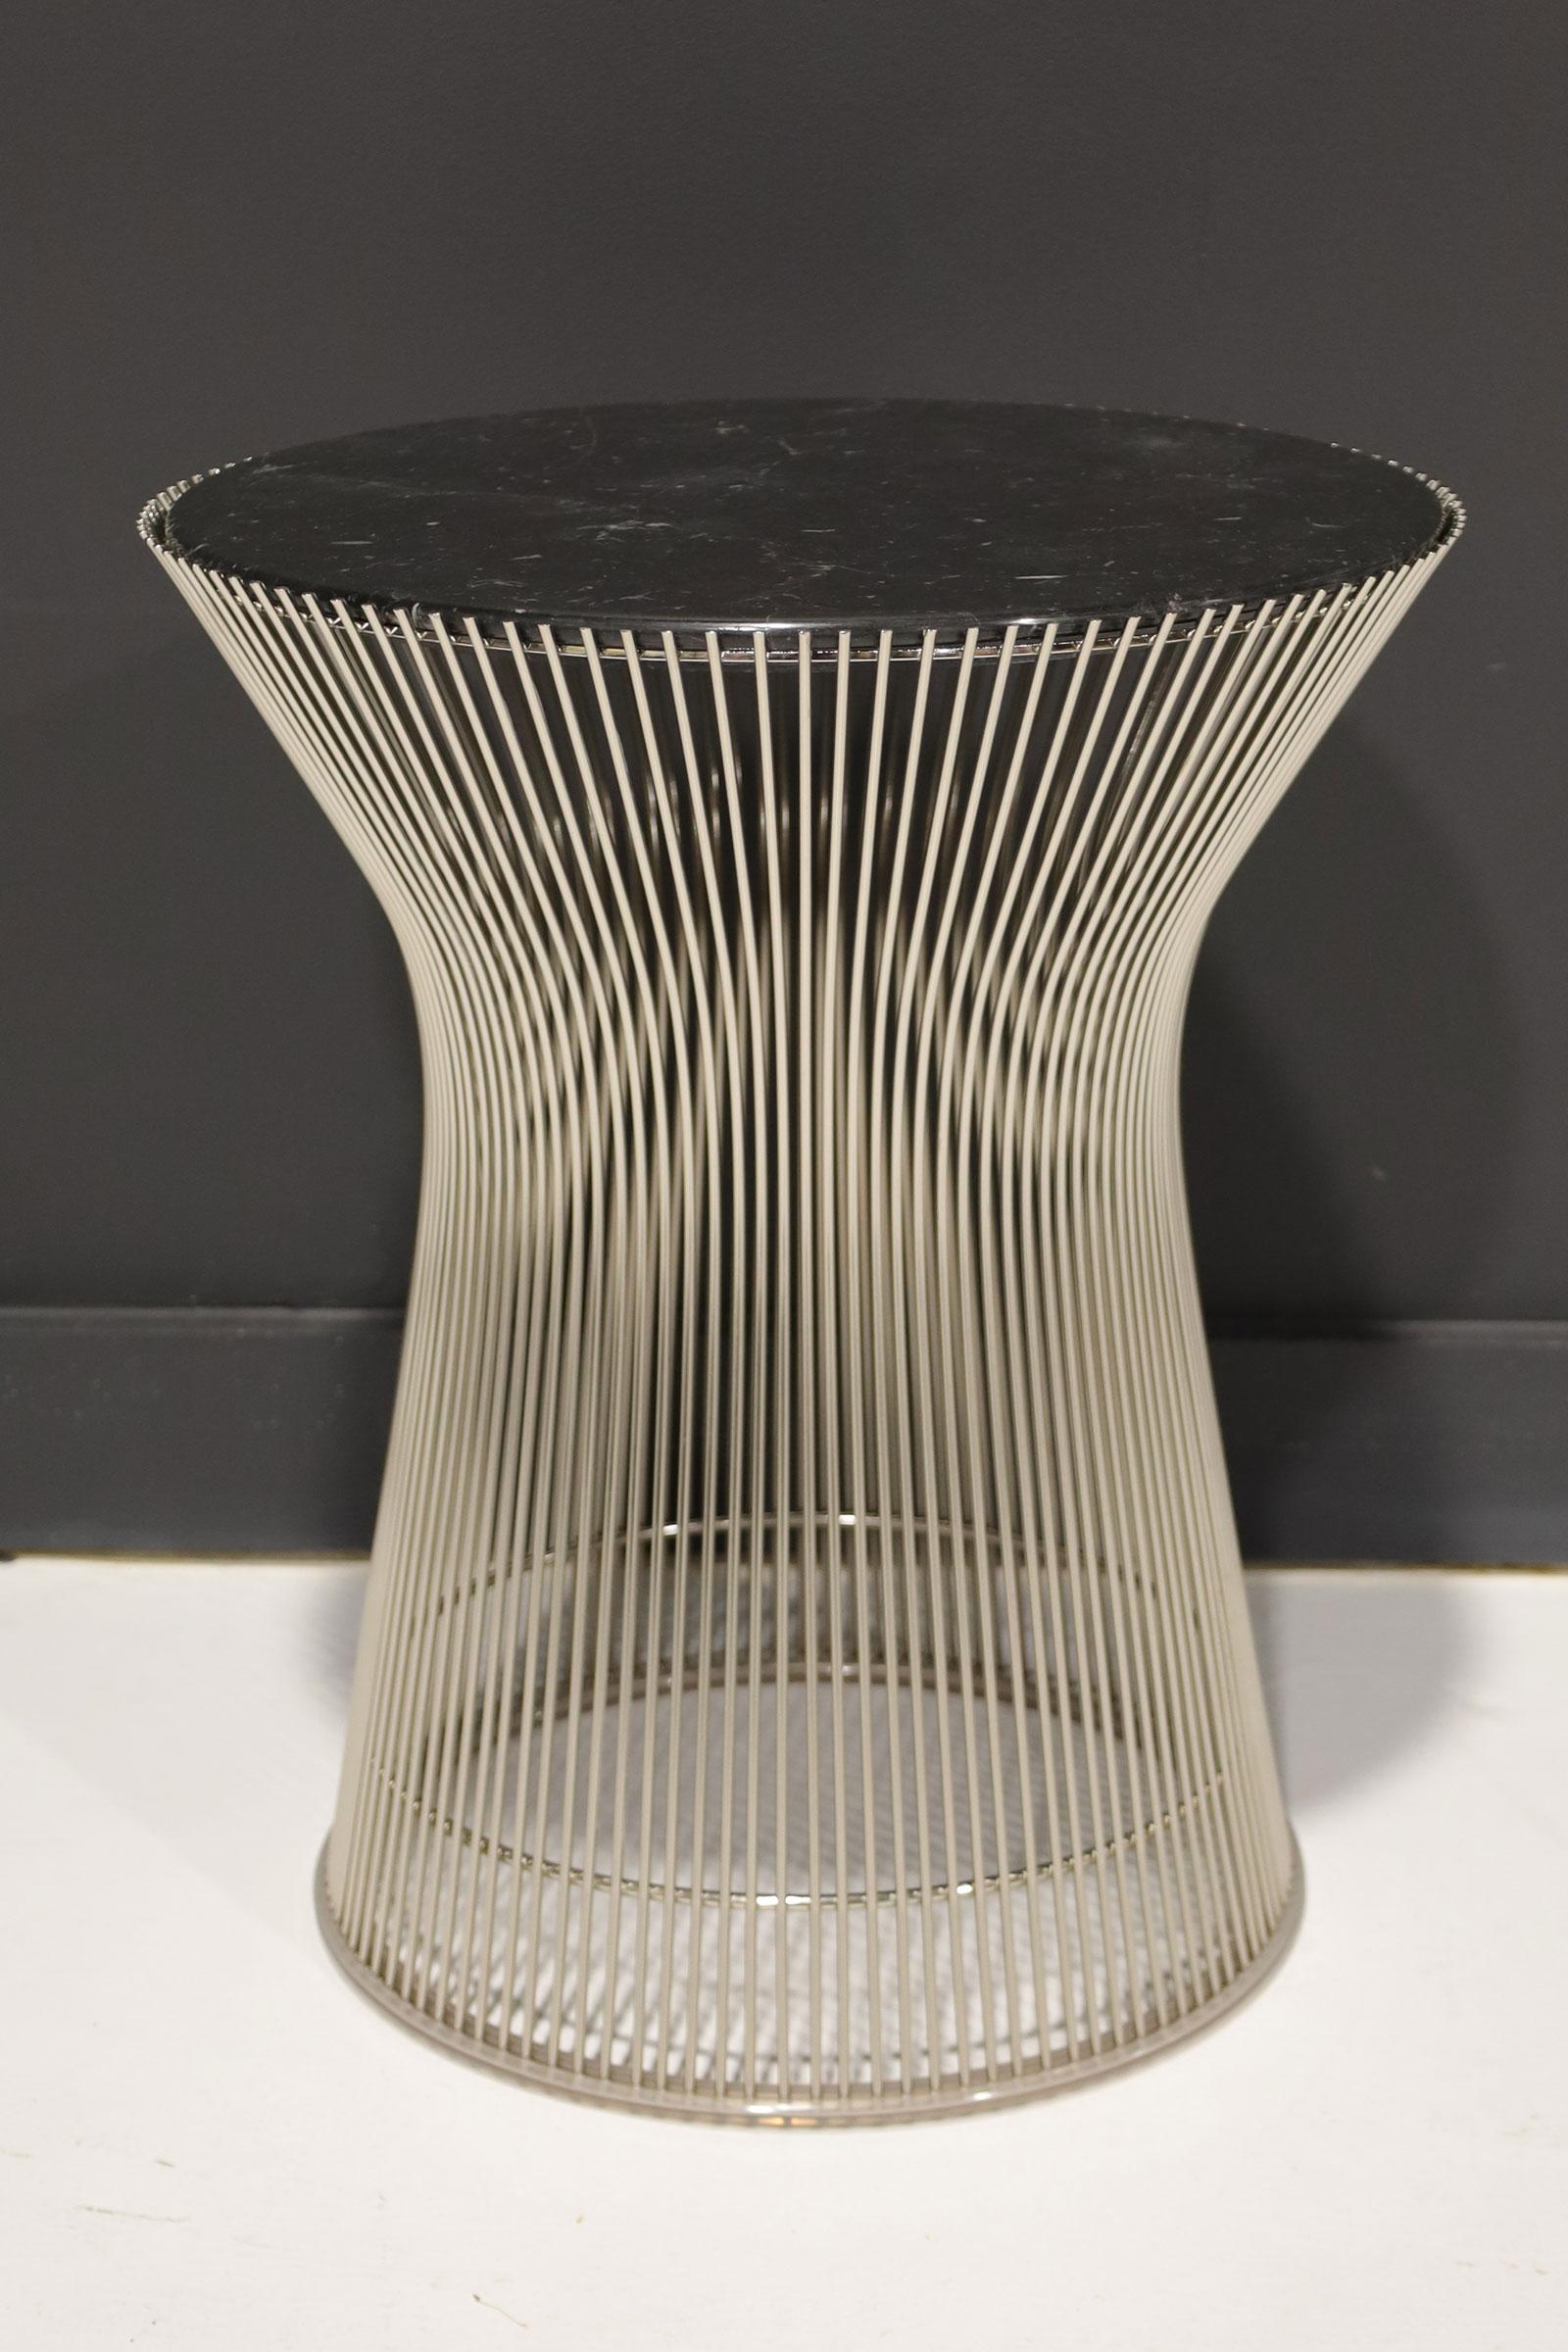 Warren Platner's iconic welded side table with polished nero marquina marble top.
  